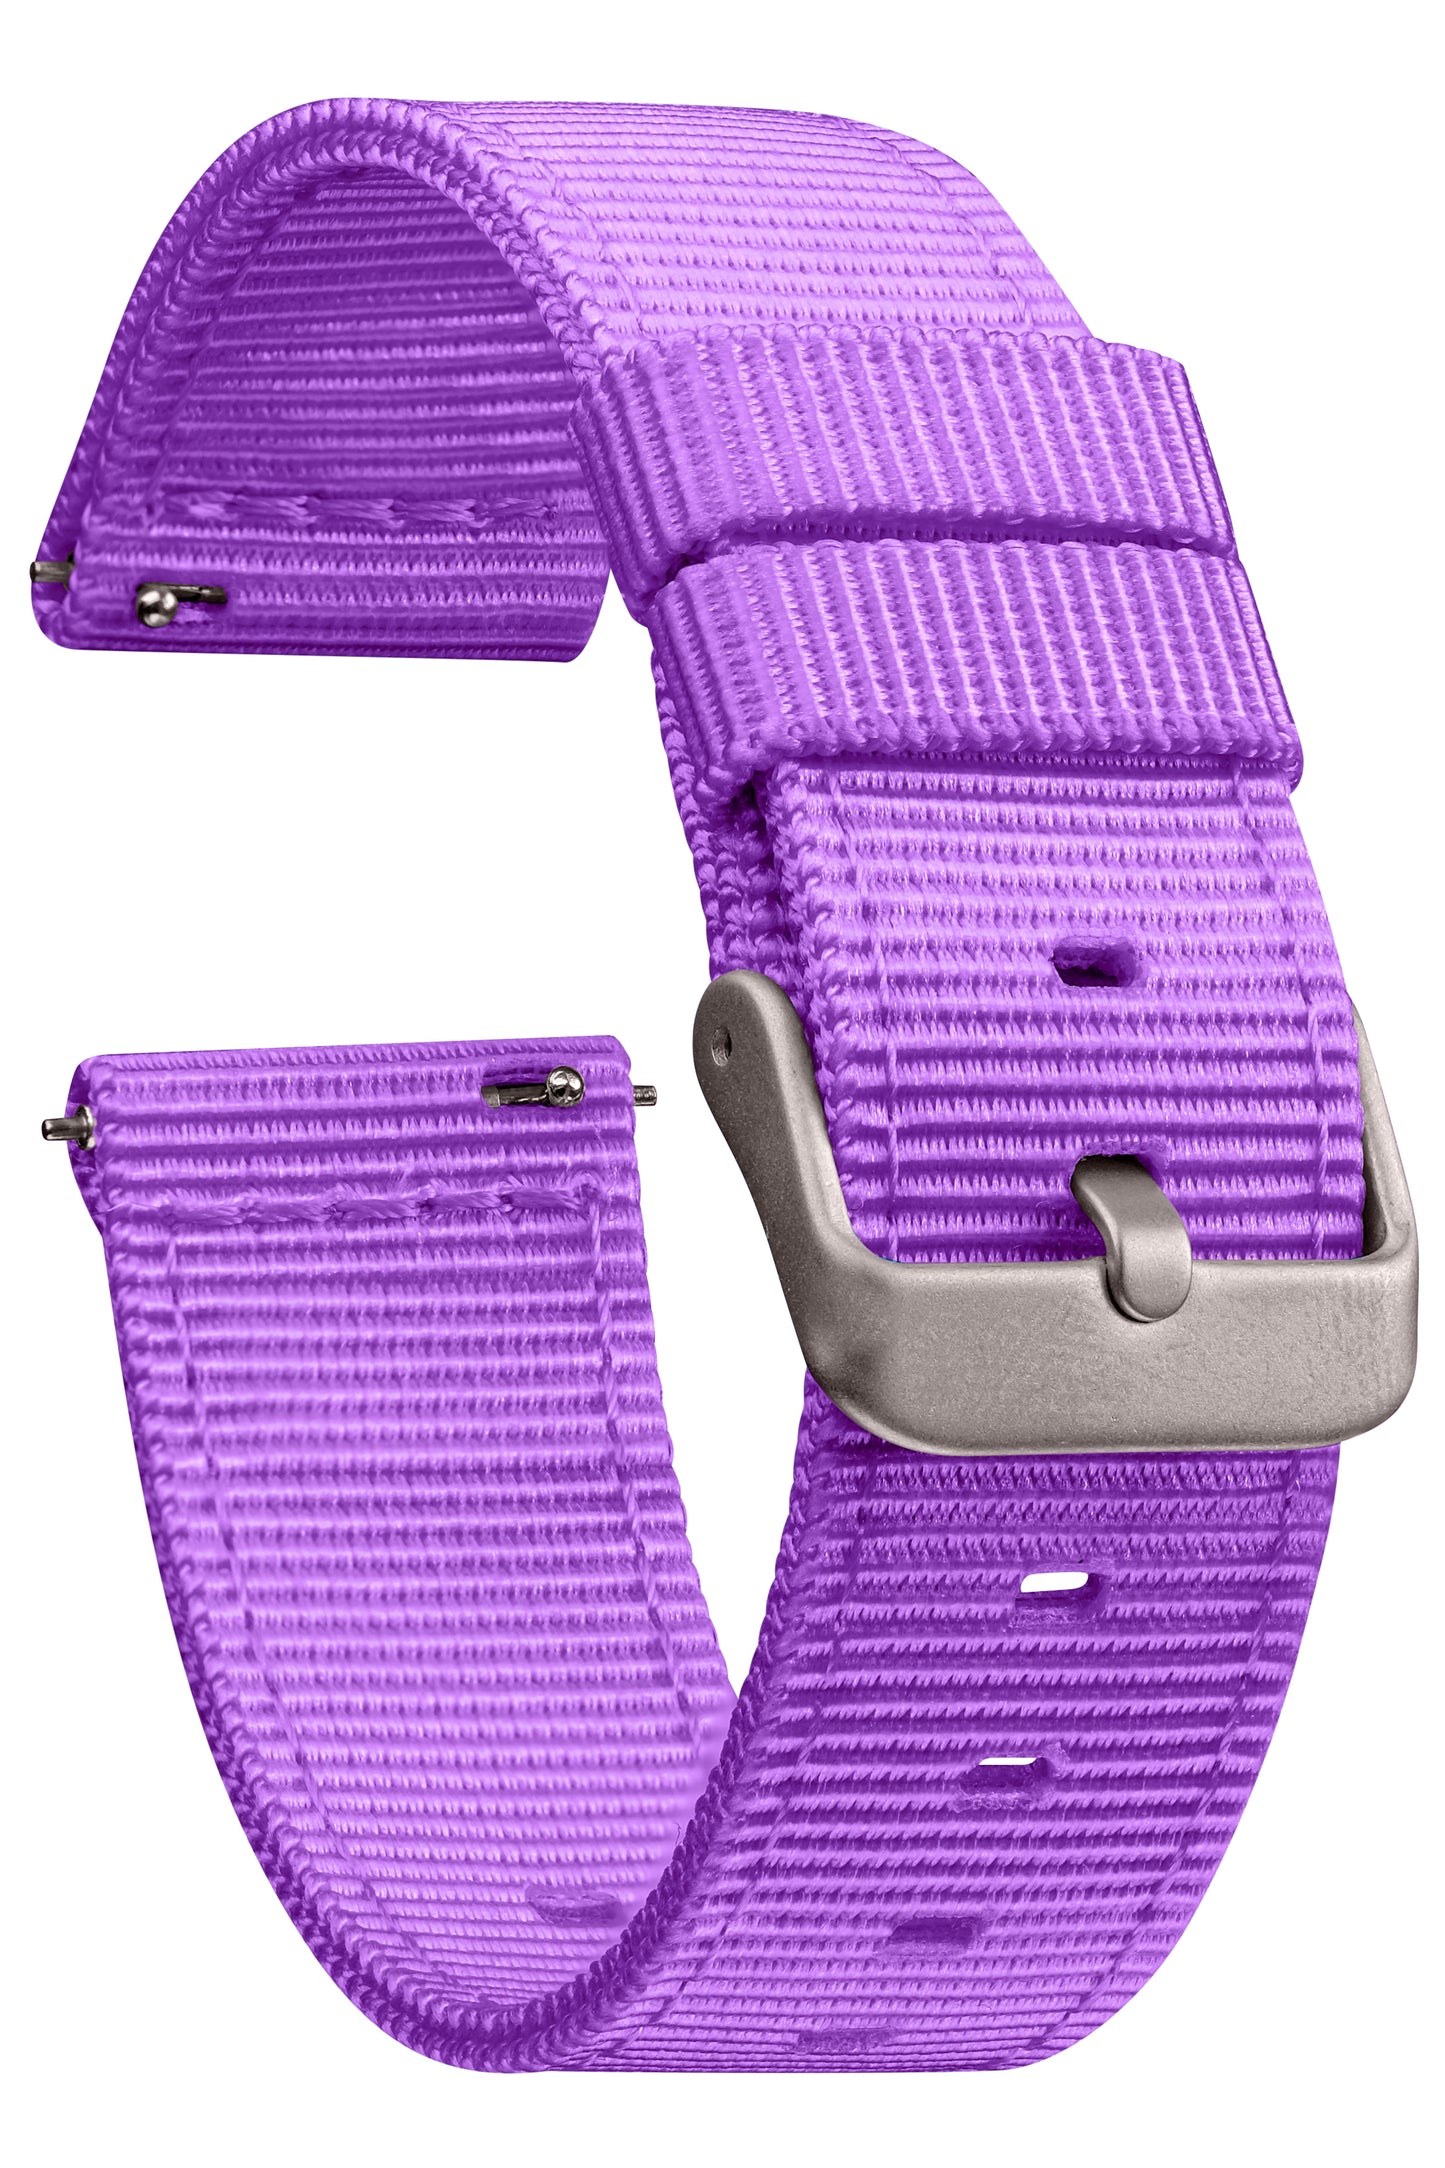 NATO Style 2 Piece Nylon Watchband - 16mm with Quick Release